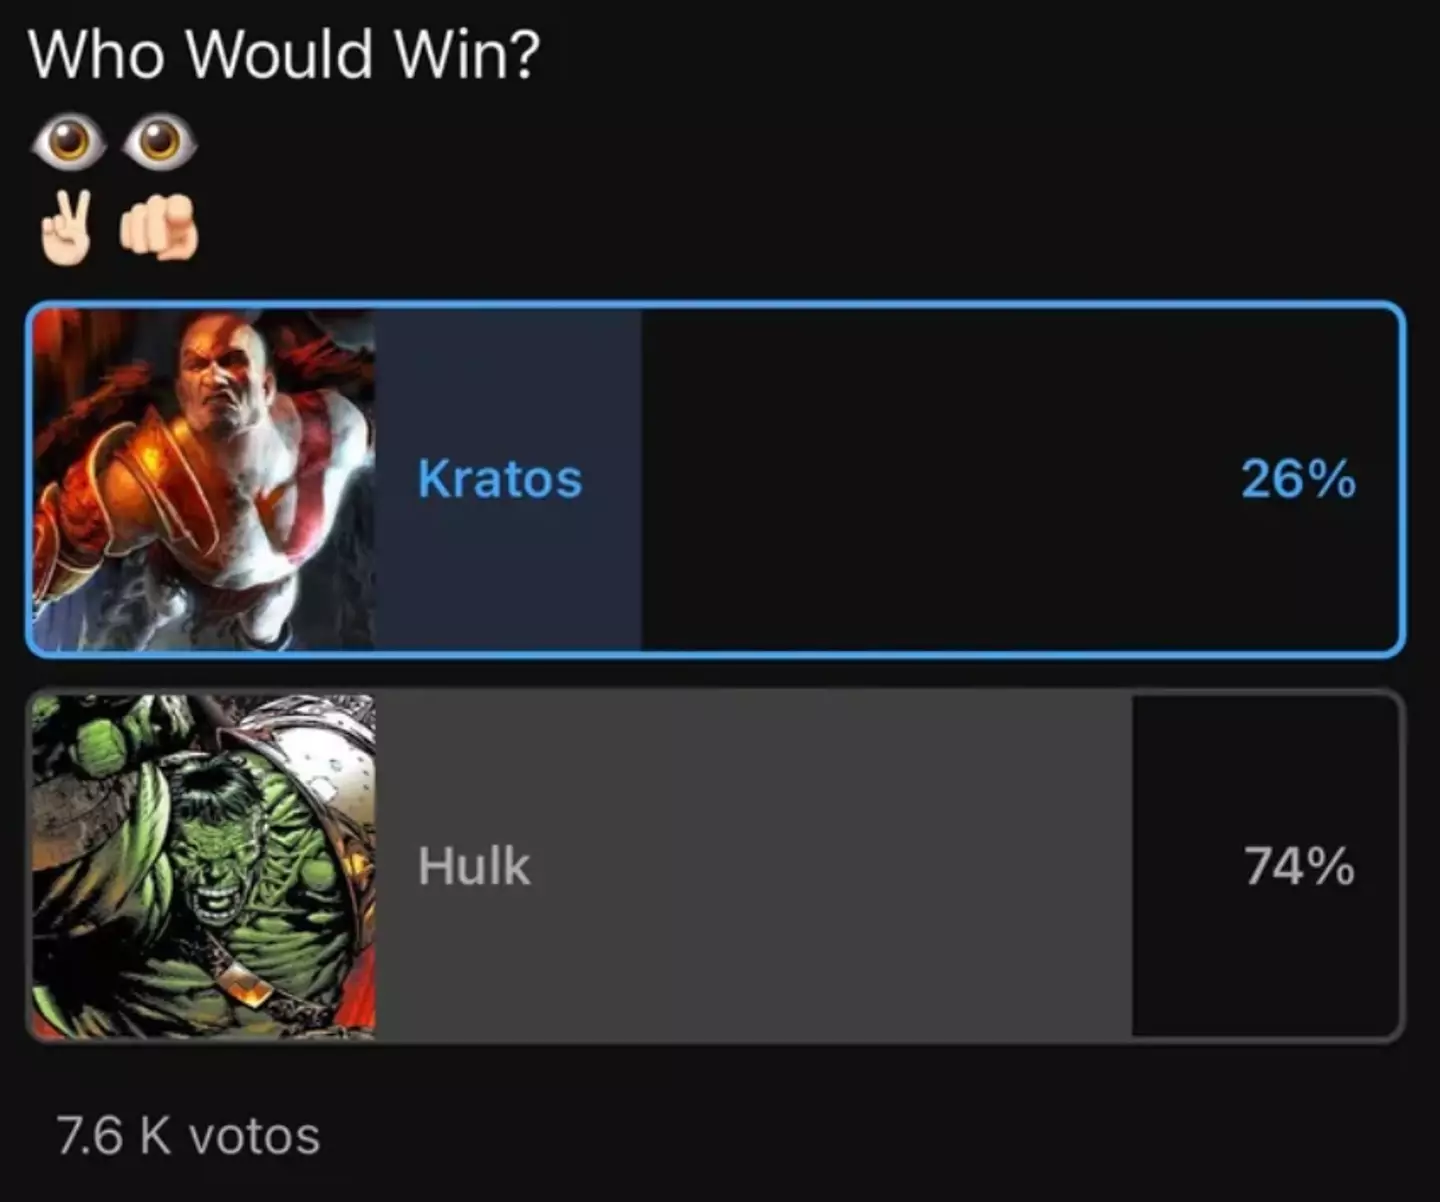 The poll results were pretty clear.